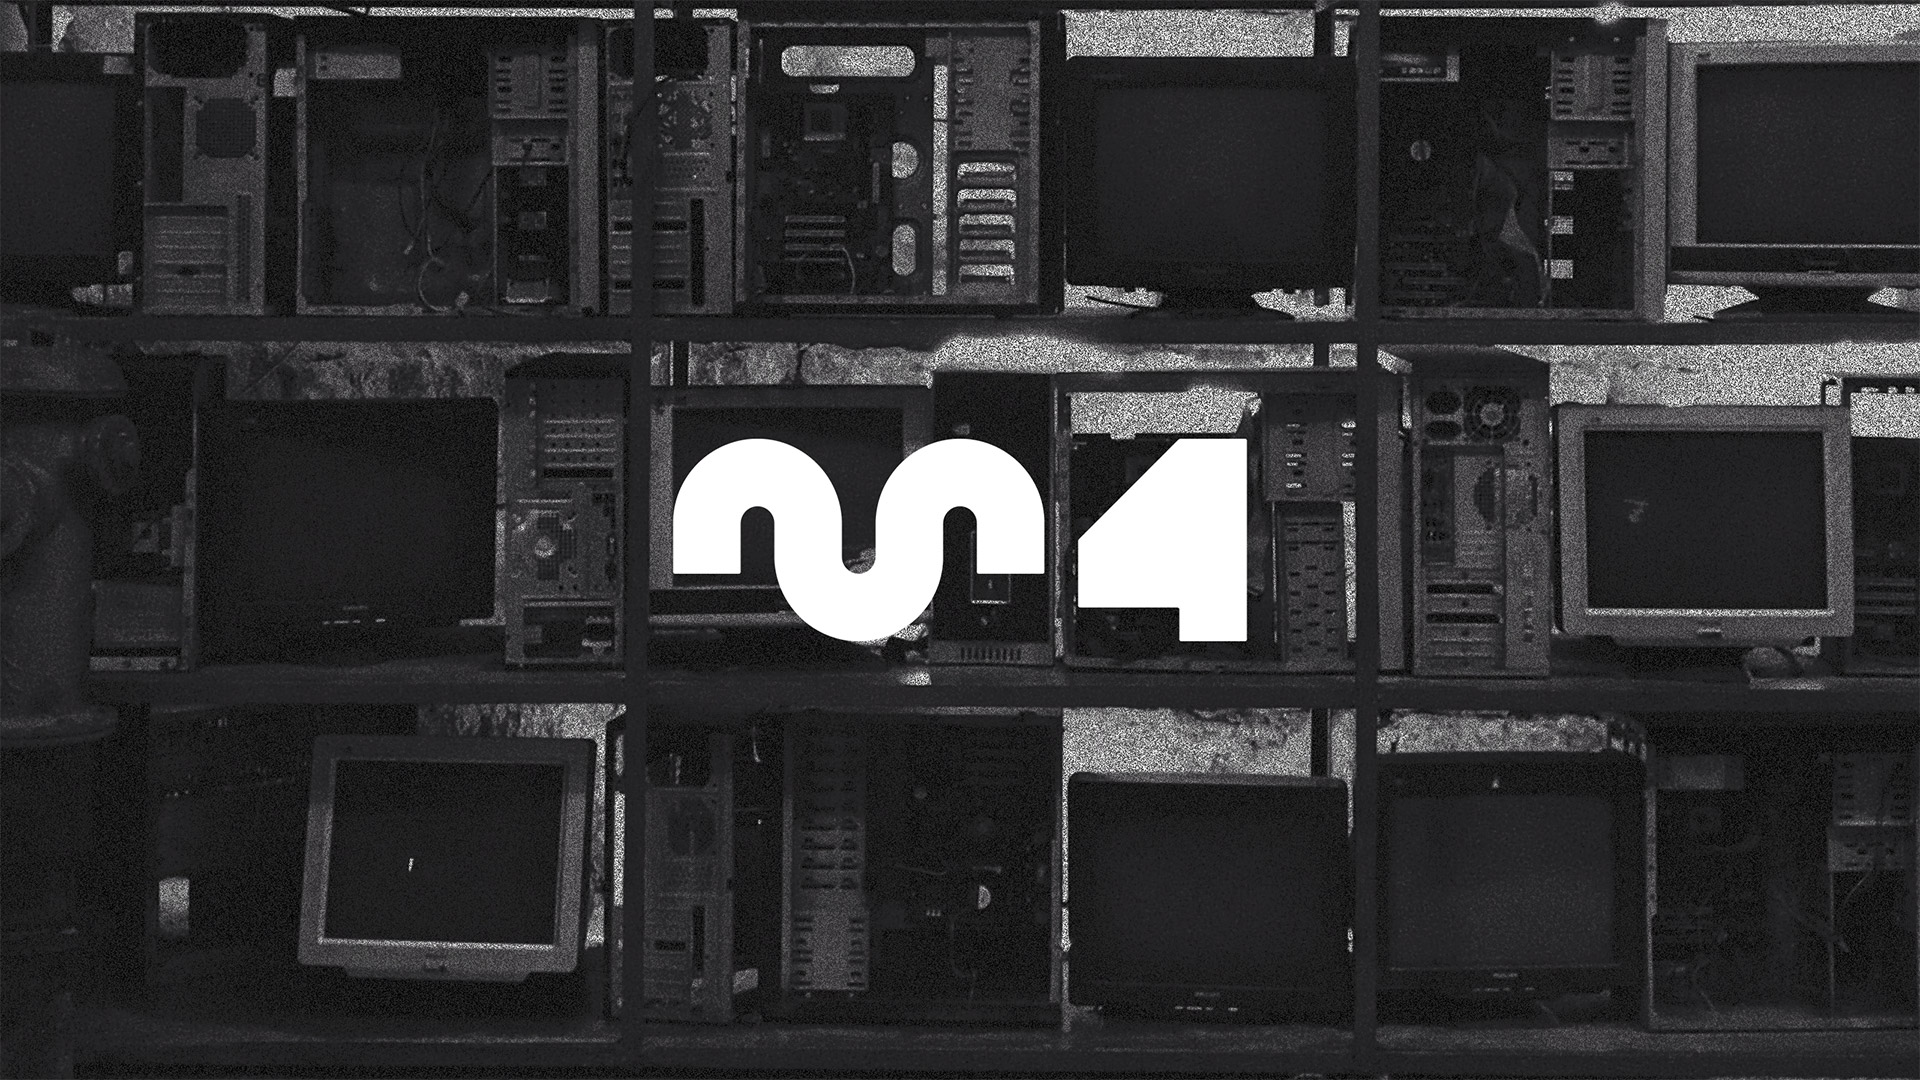 An abstract, symbol-based logomark featuring a one-and-a-half-cycle segment of a sine wave, and an abstract digit ‘4’; laid over a grayscale photograph featuring shelves of vintage electronics and screens.